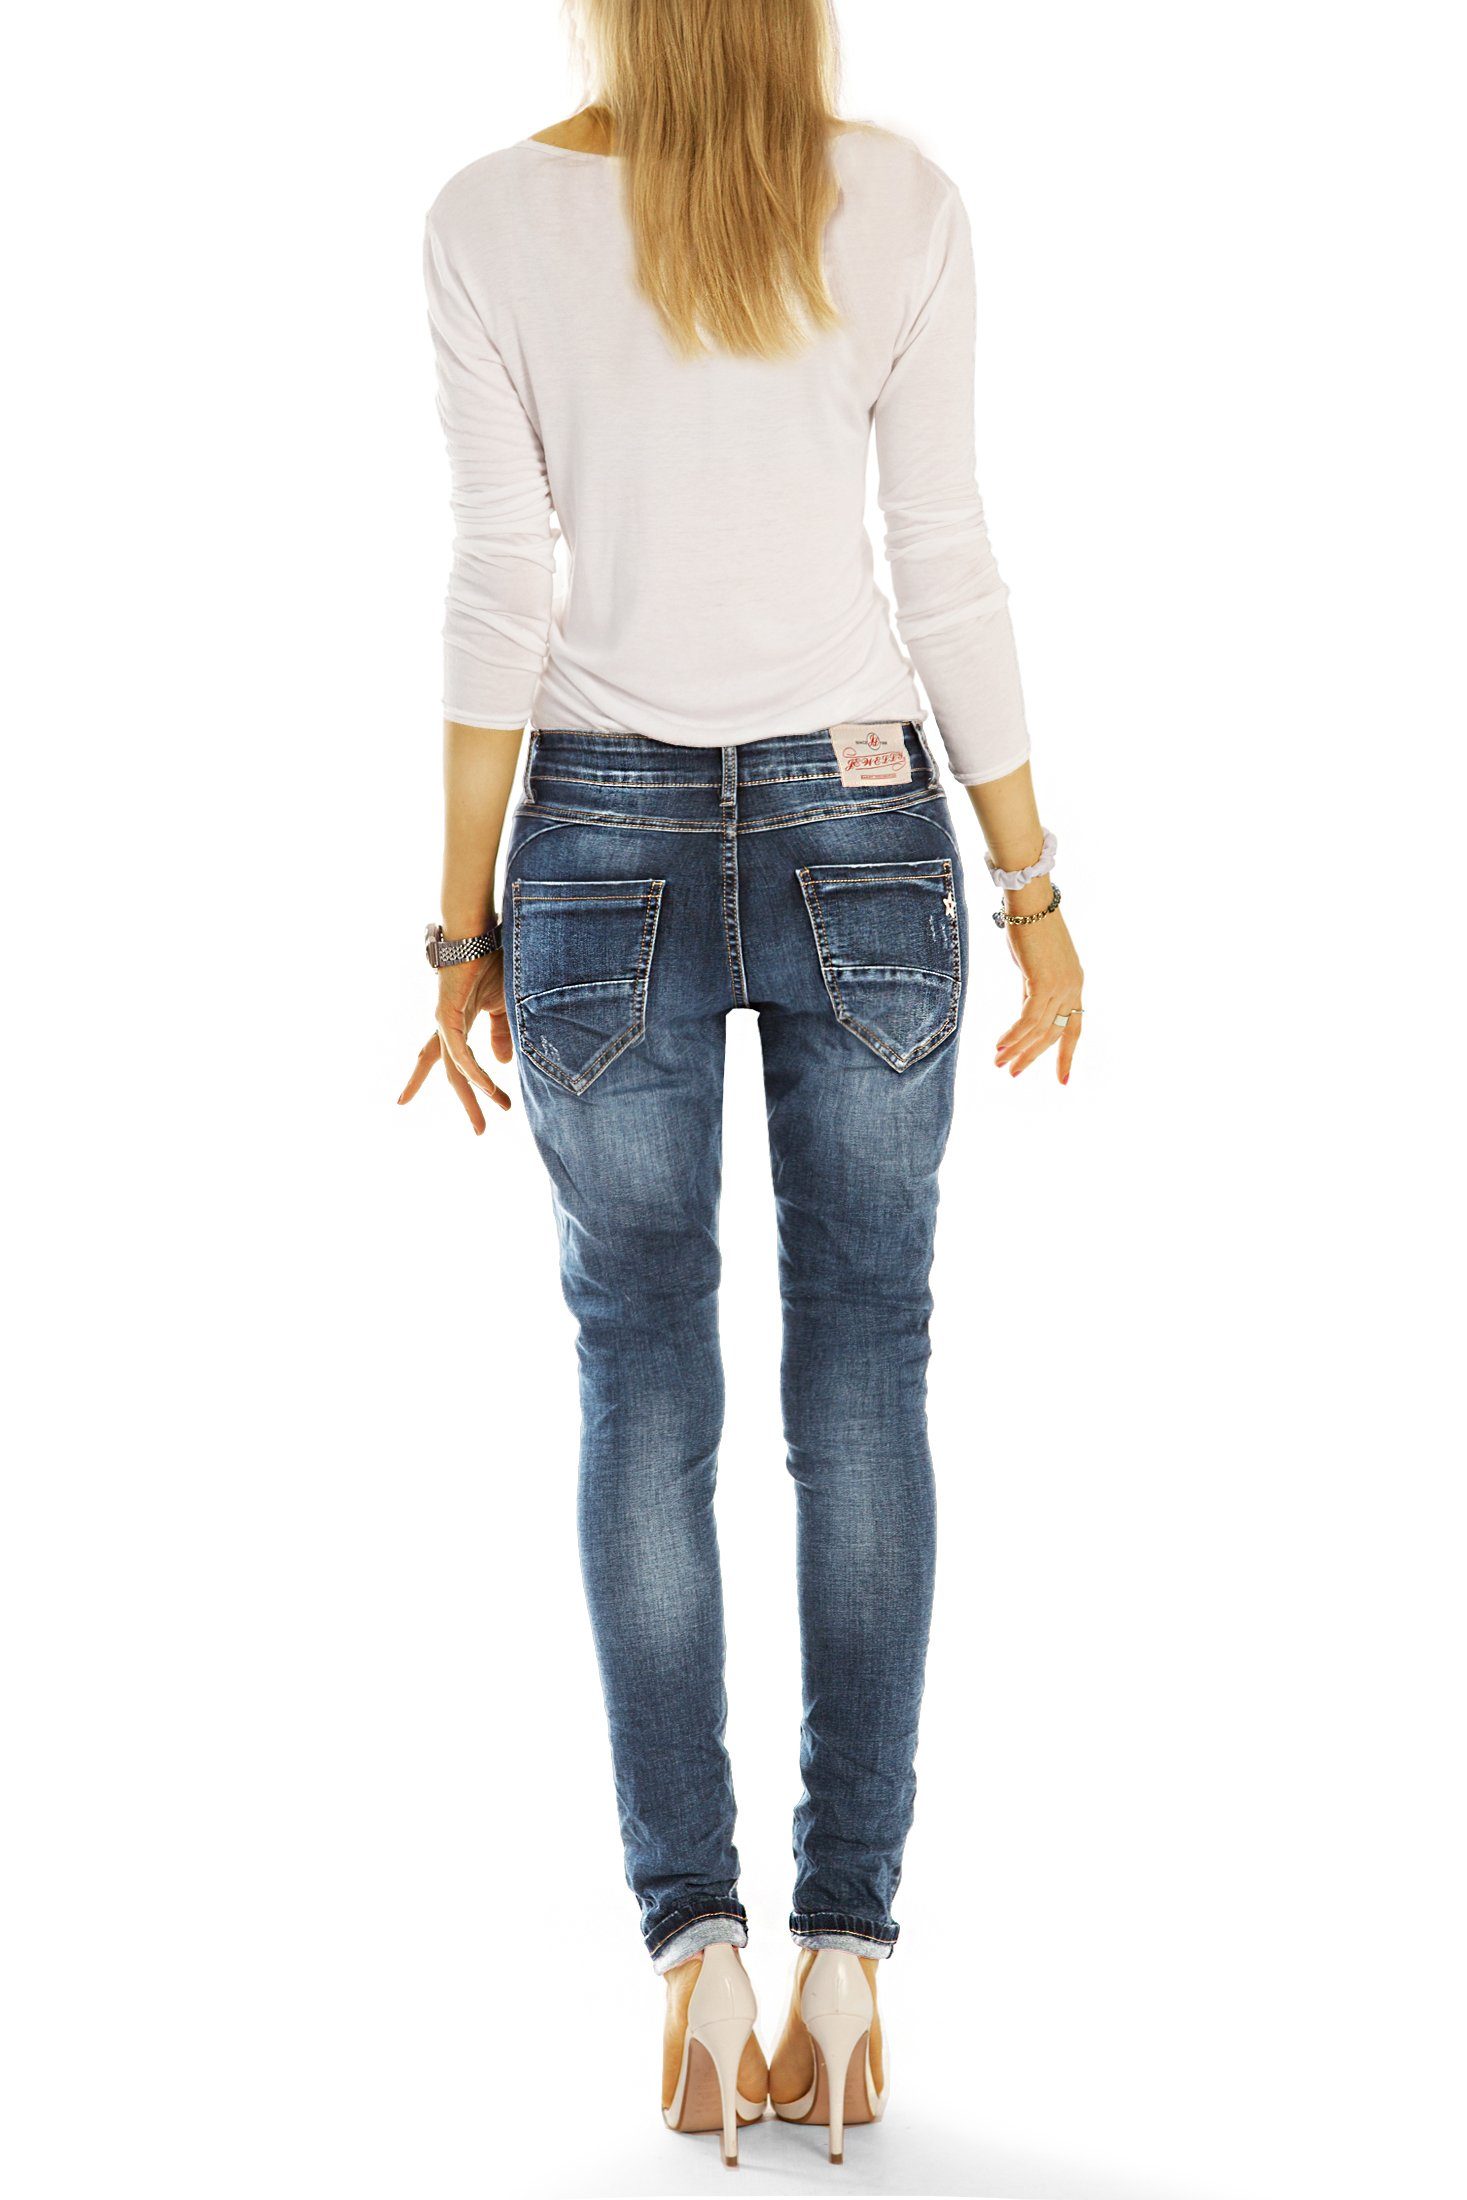 relaxed be Damenjeans, Boyfriend-Jeans bequeme fit styled j19i-1 stretchiger destroyed